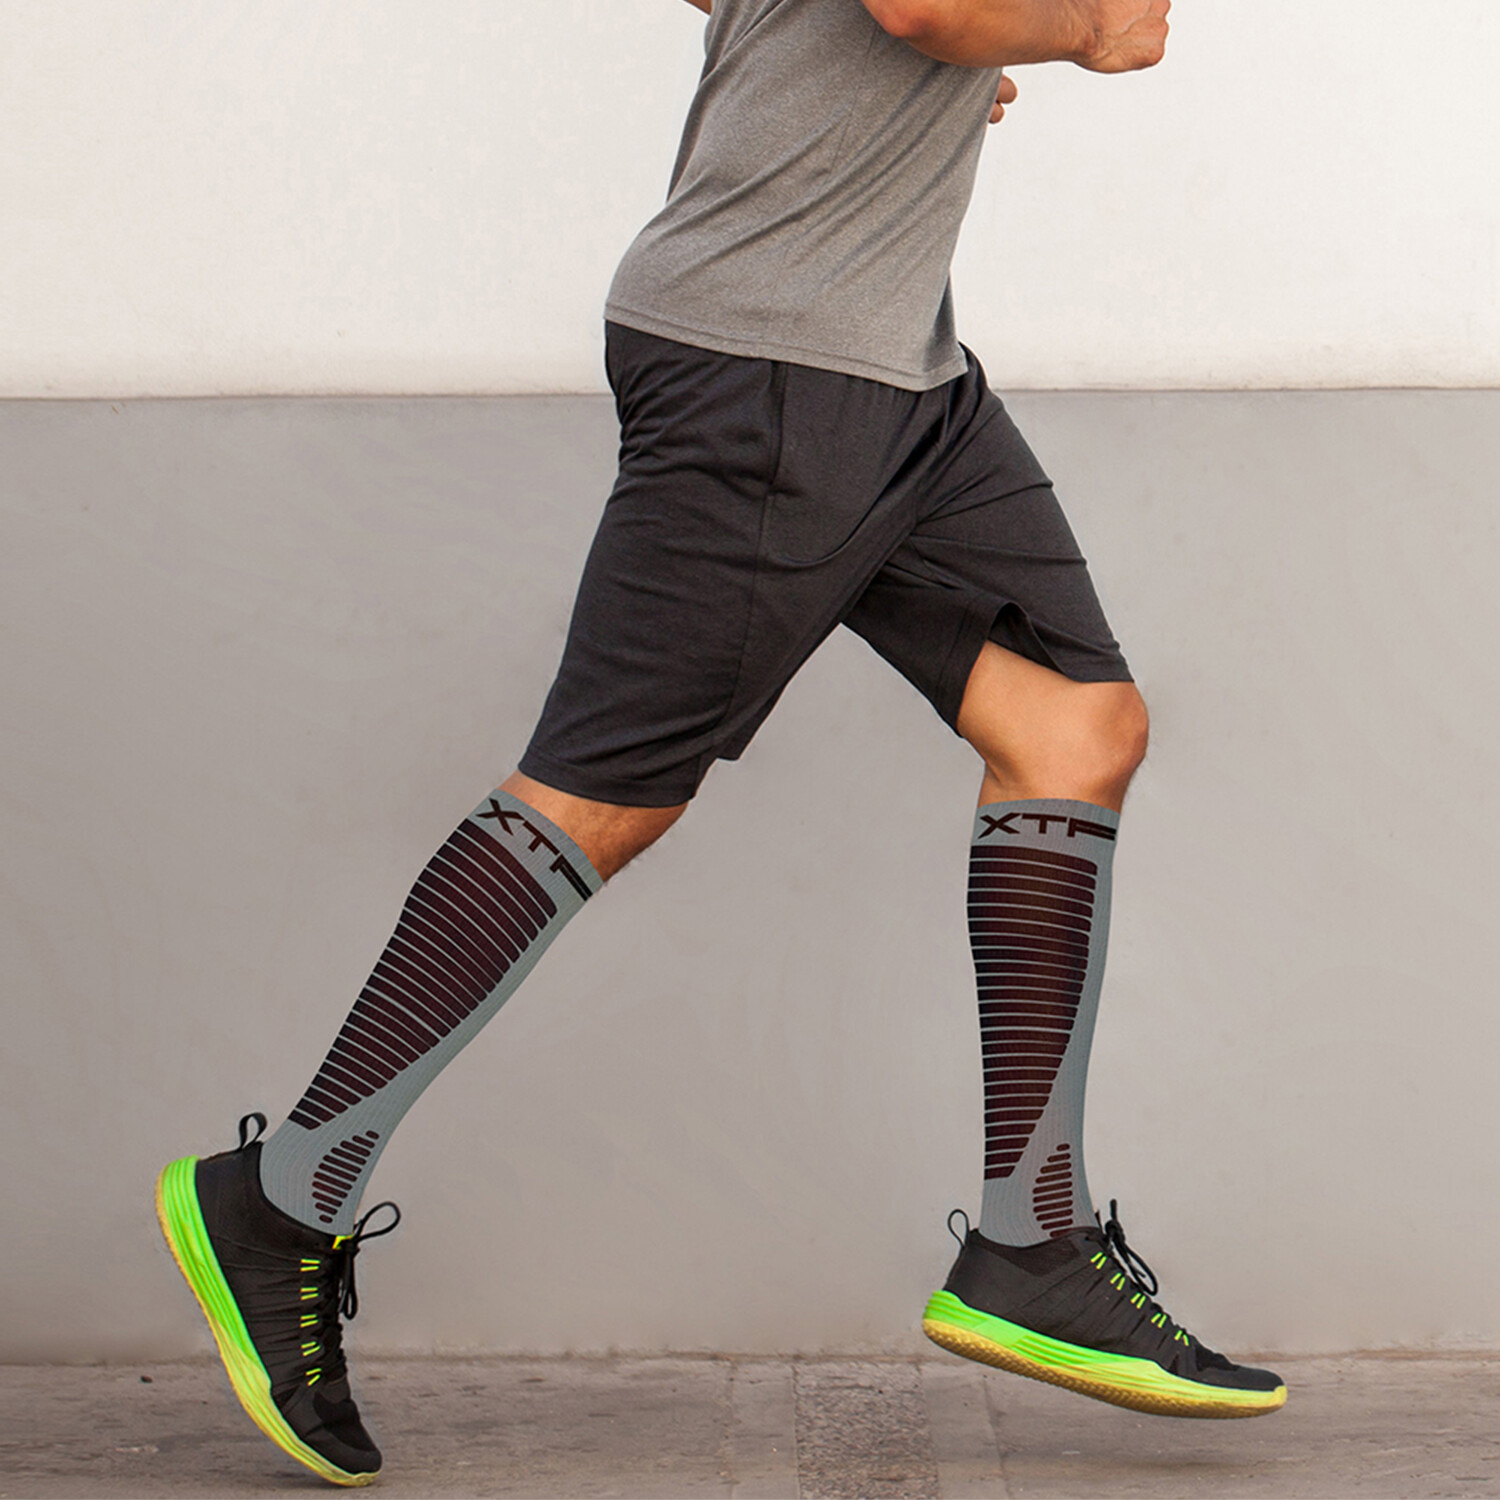 COPPER-INFUSED KNEE-HIGH COMPRESSION SOCKS (3-PAIRS) – CopperFlux